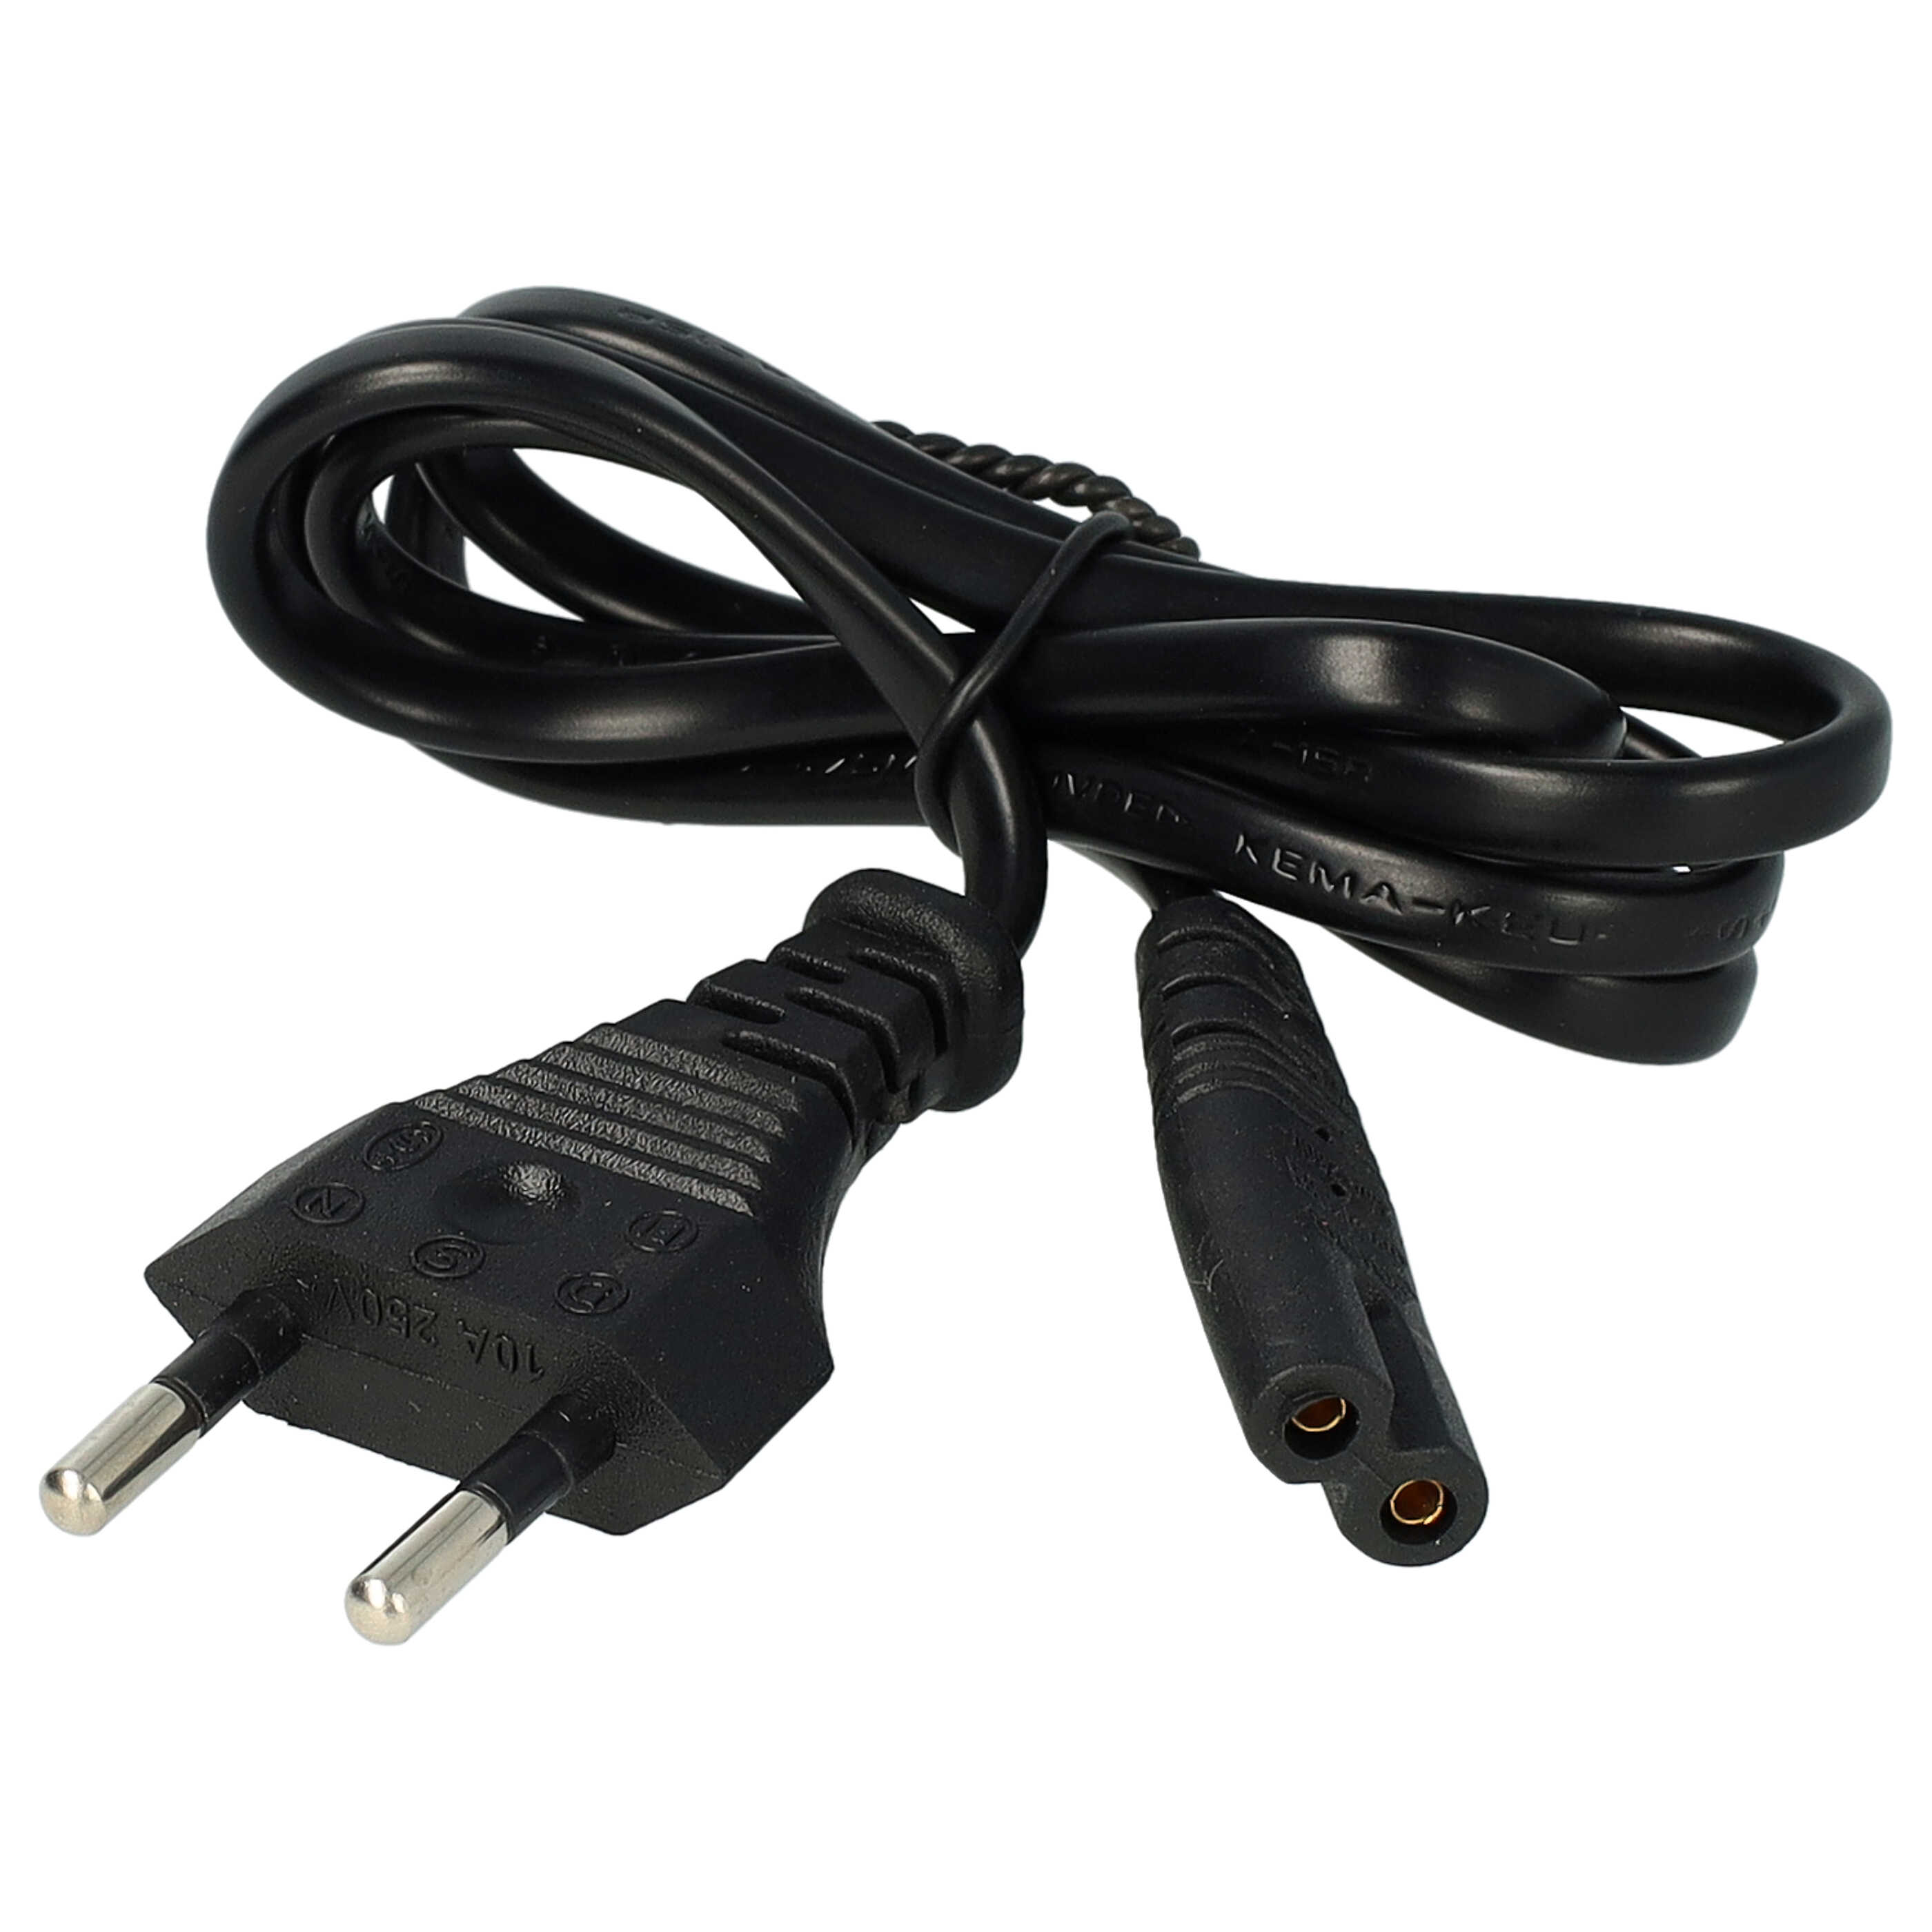 Mains Power Adapter with 5.5 x 2.5 mm Plug suitable for various Electric Devices - 24 V, 2 A